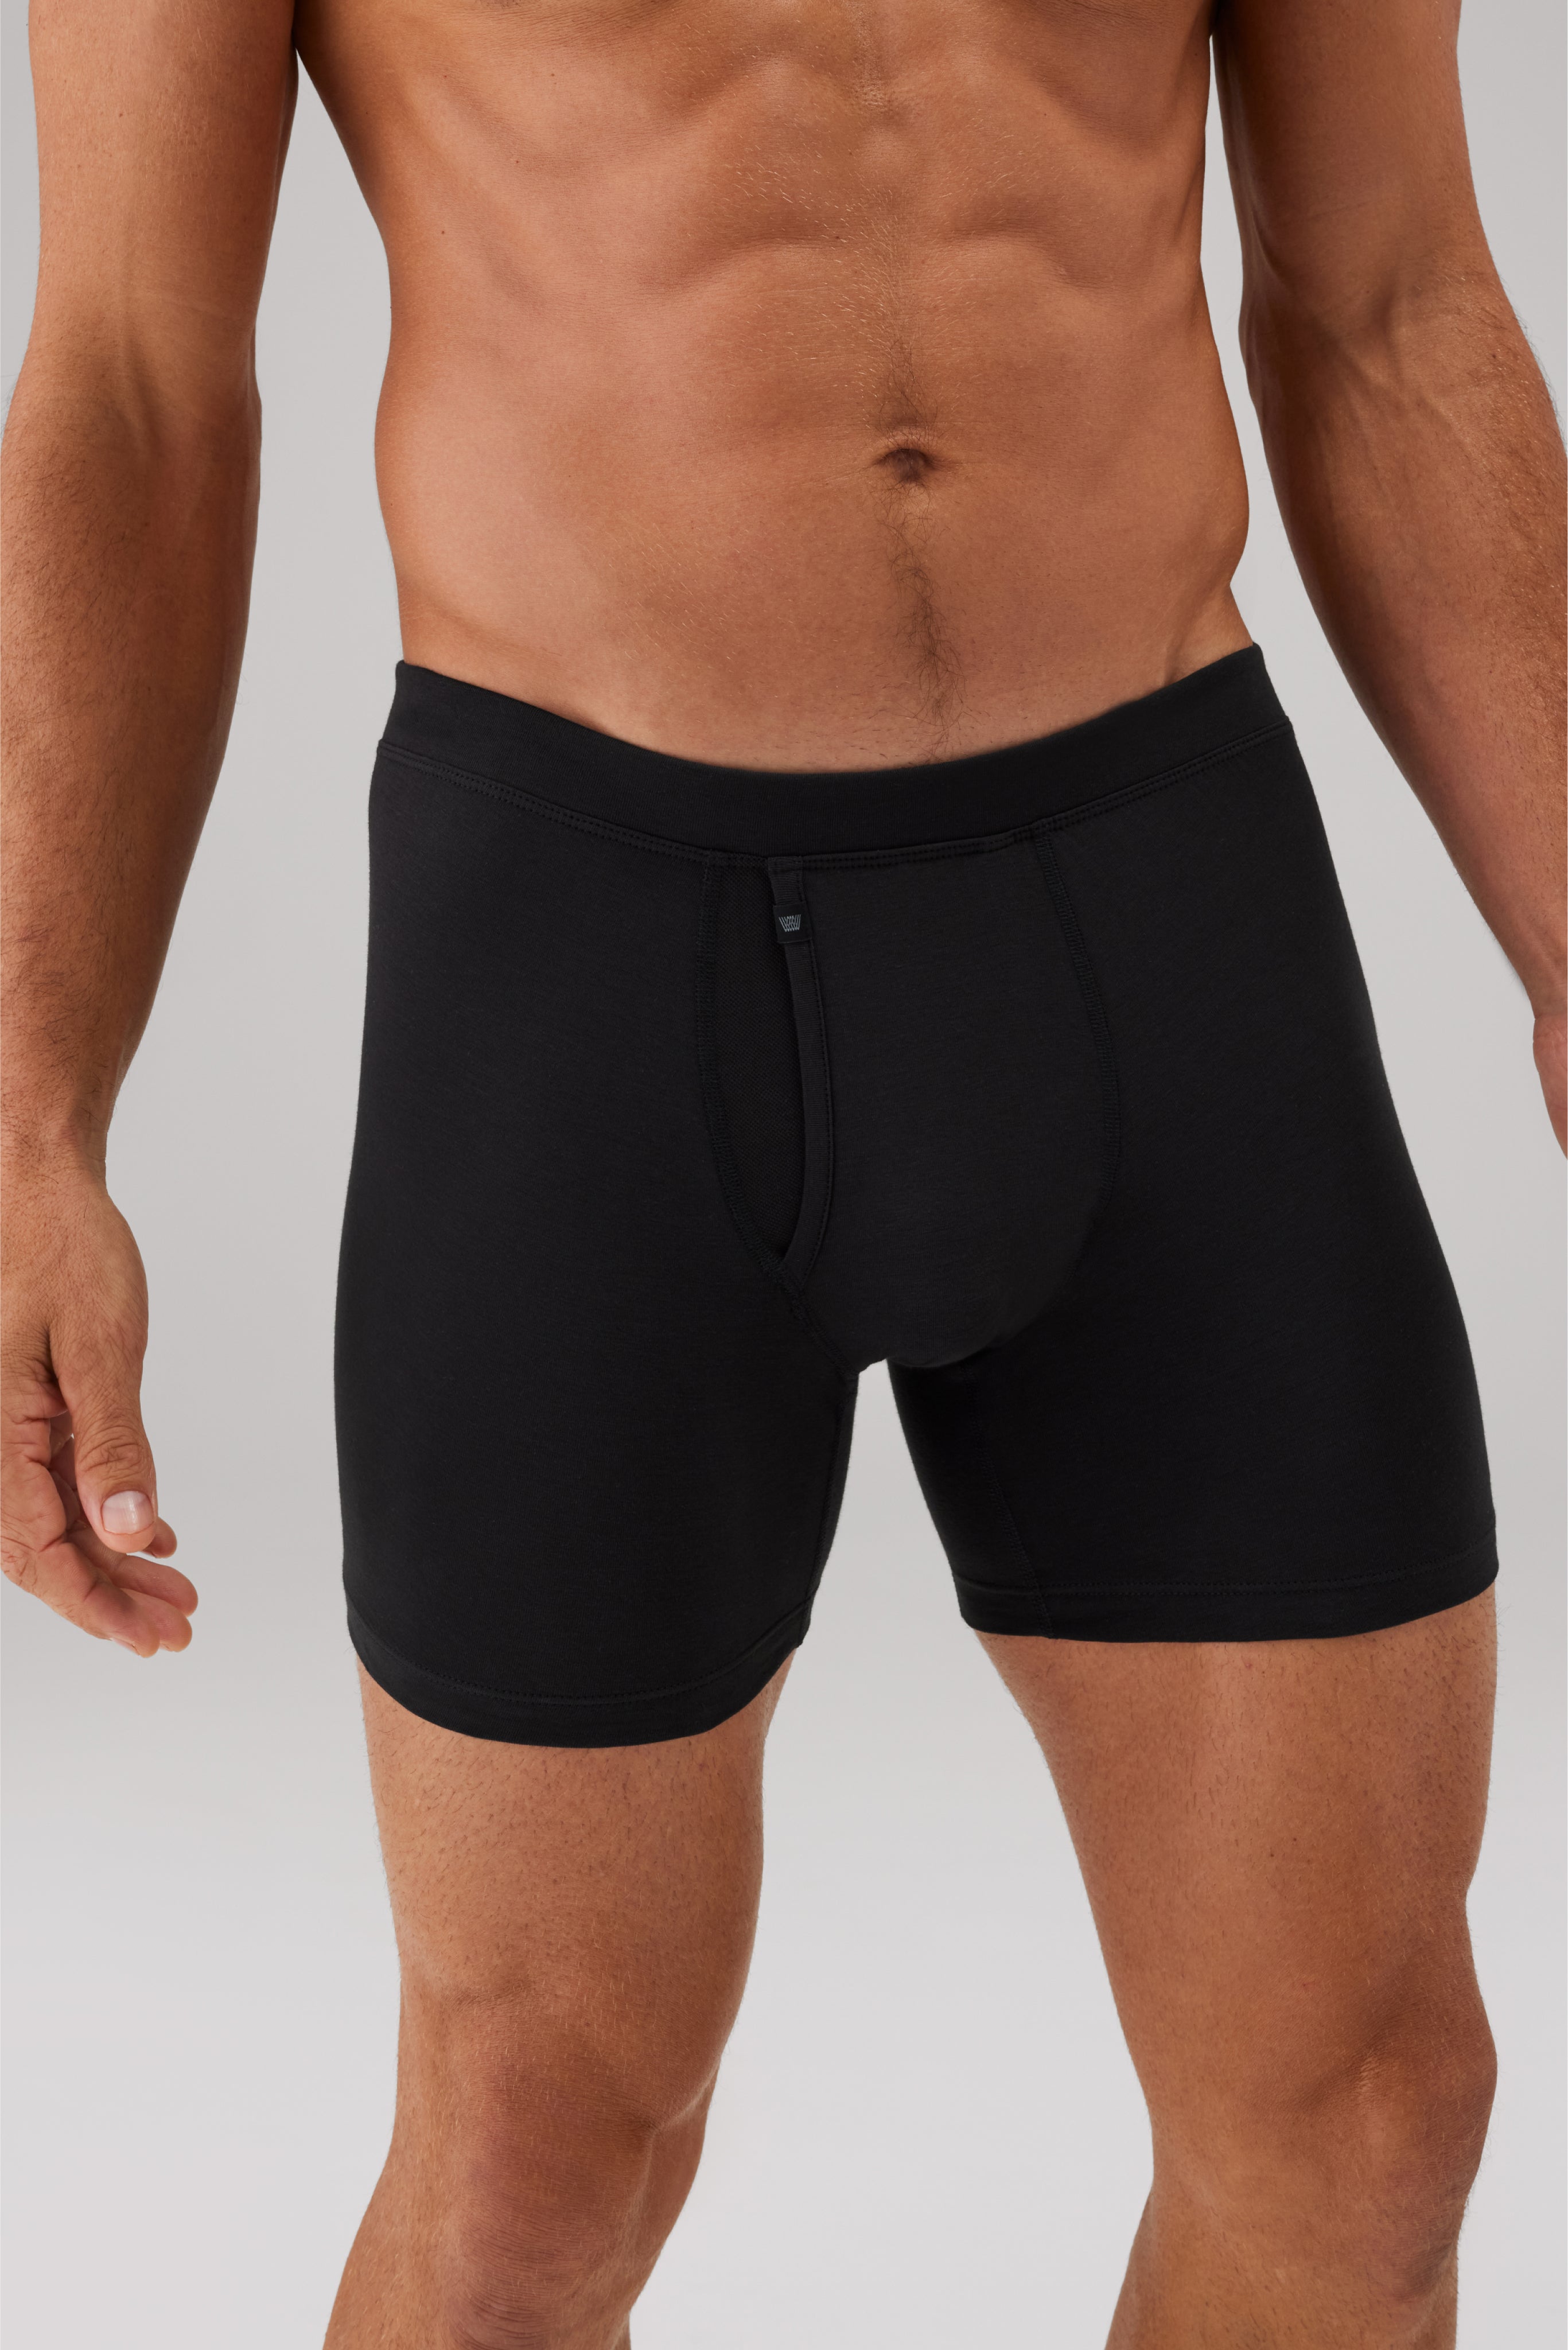 3-Pack SILVER Boxer Briefs Classic Combo